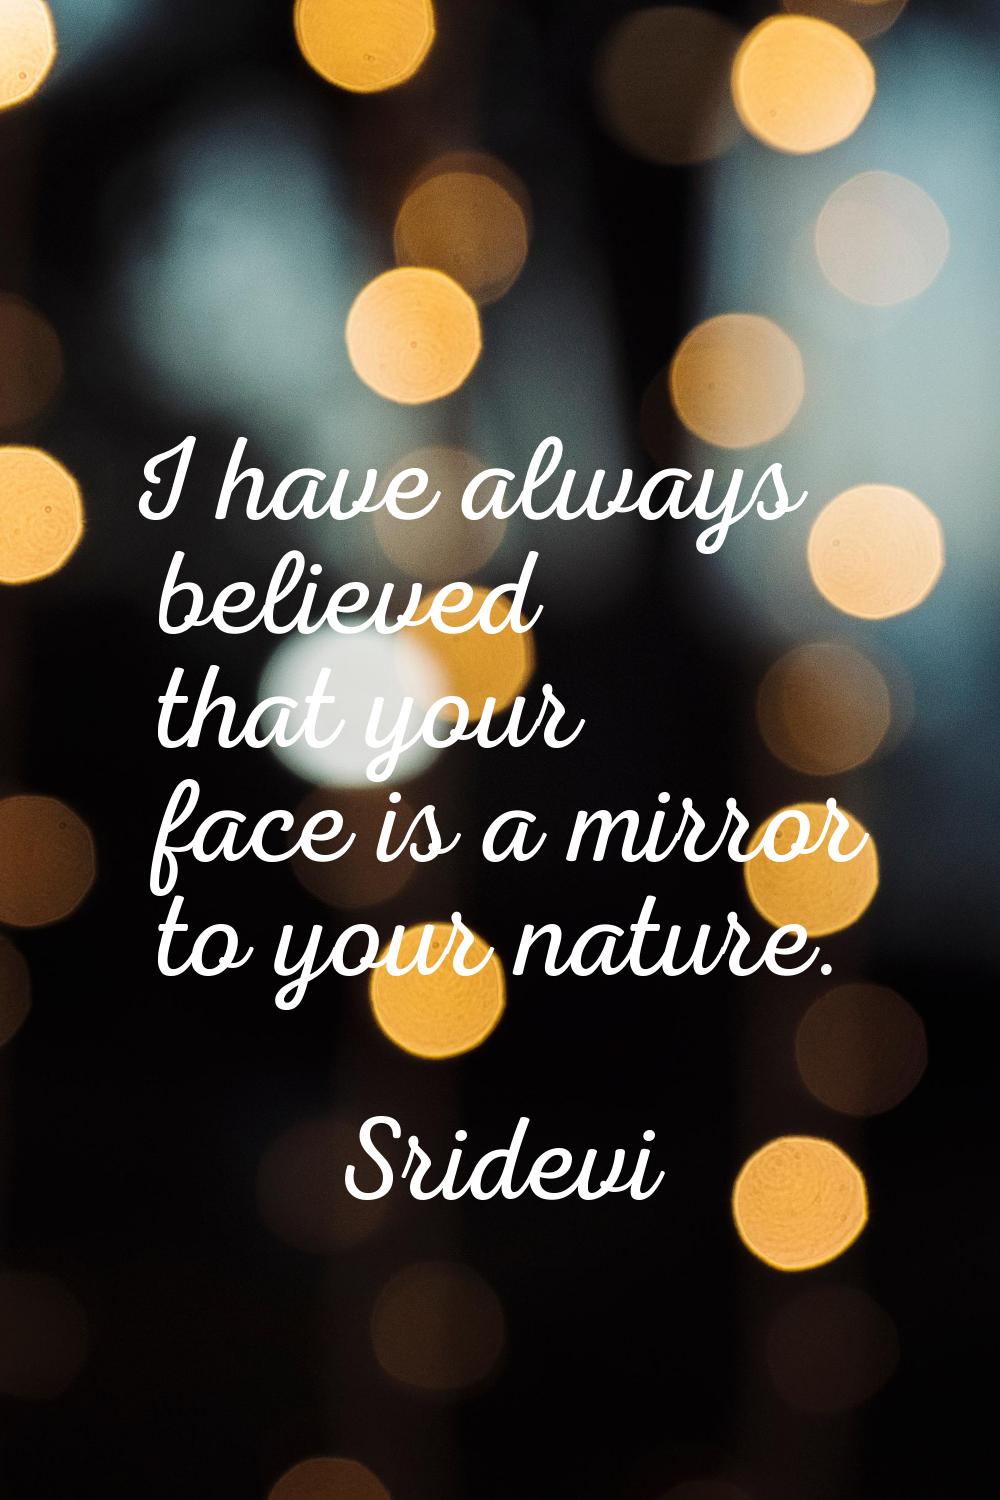 I have always believed that your face is a mirror to your nature.